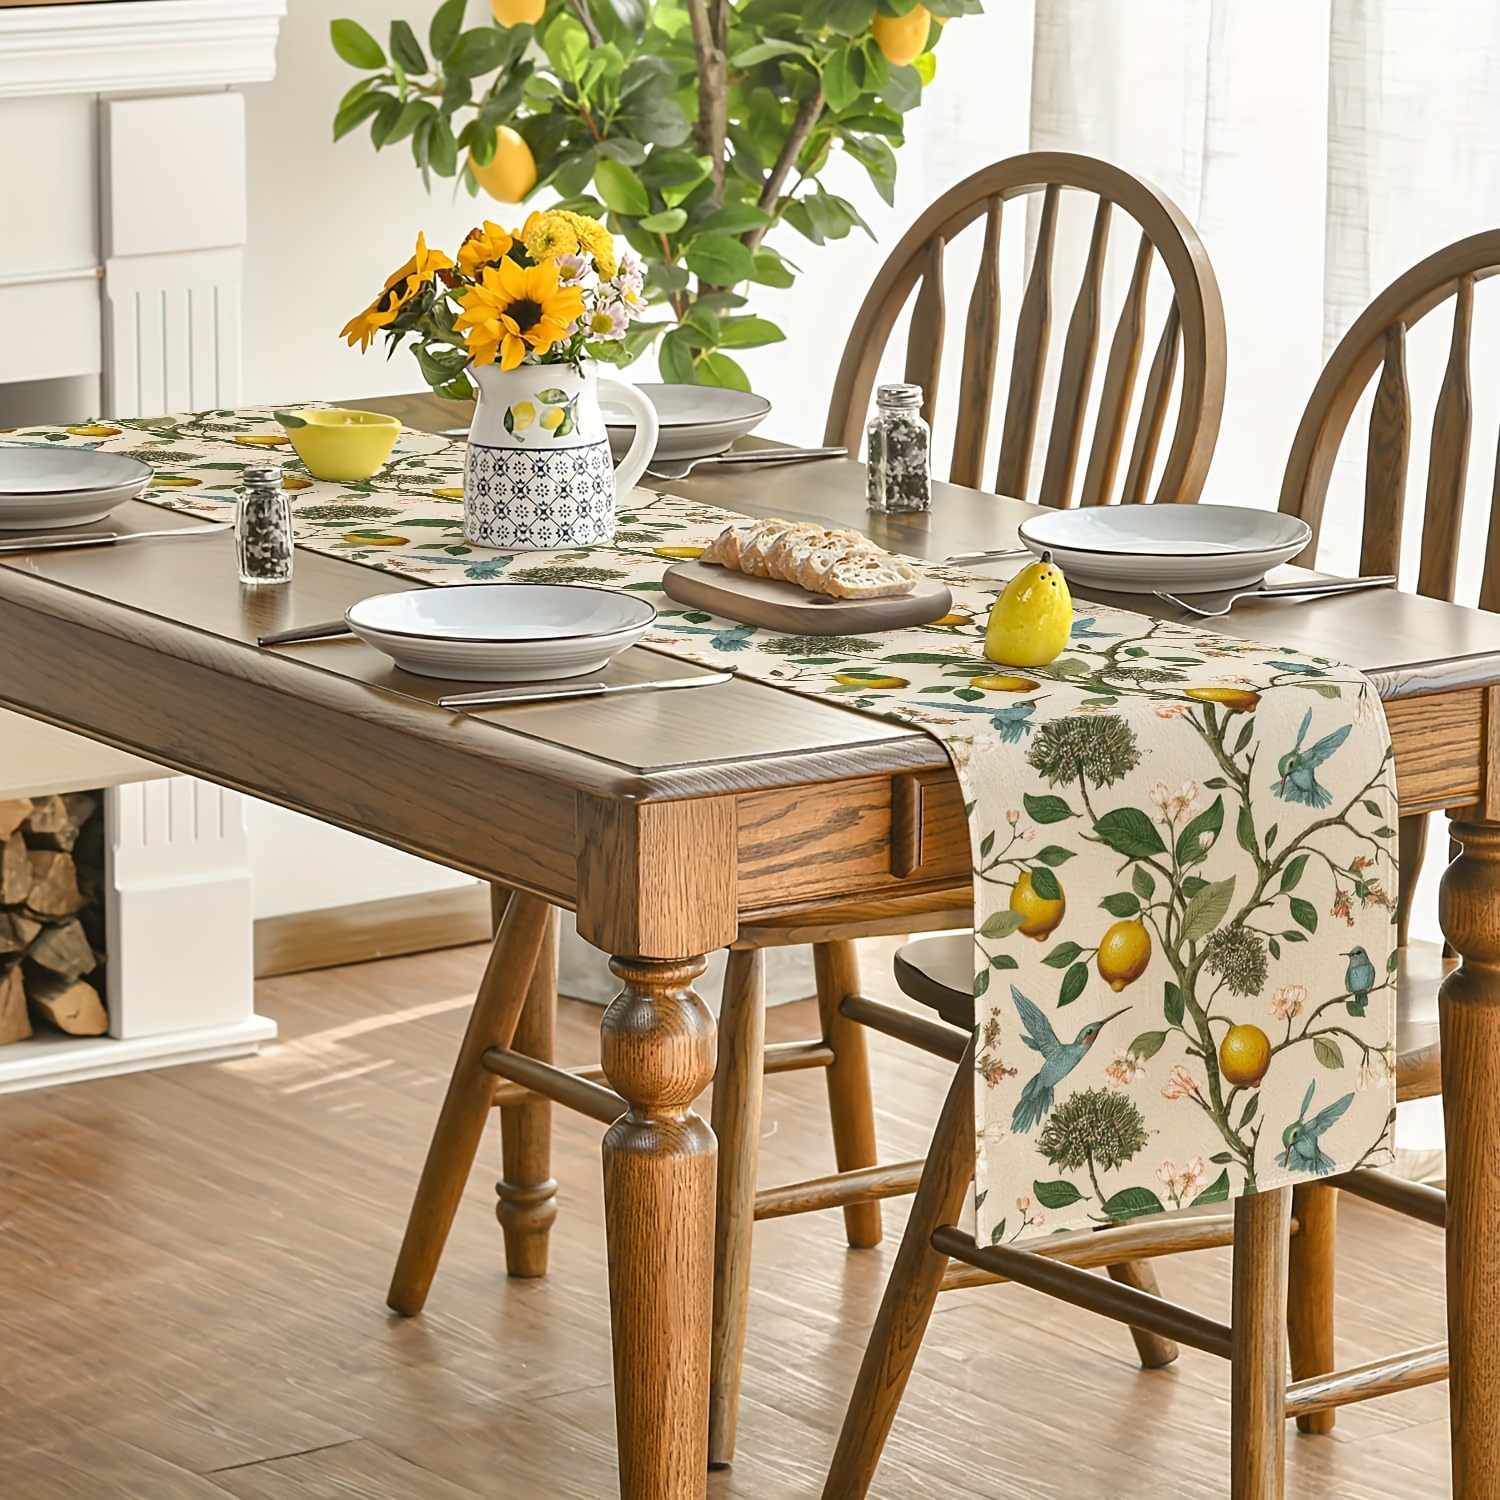 

Summer Bliss Table Runner - Brown Lemon Tree & Bird Design, Perfect For Indoor/outdoor Dining & Parties, Durable Polyester Summer Table Decor Outdoor Table Decor